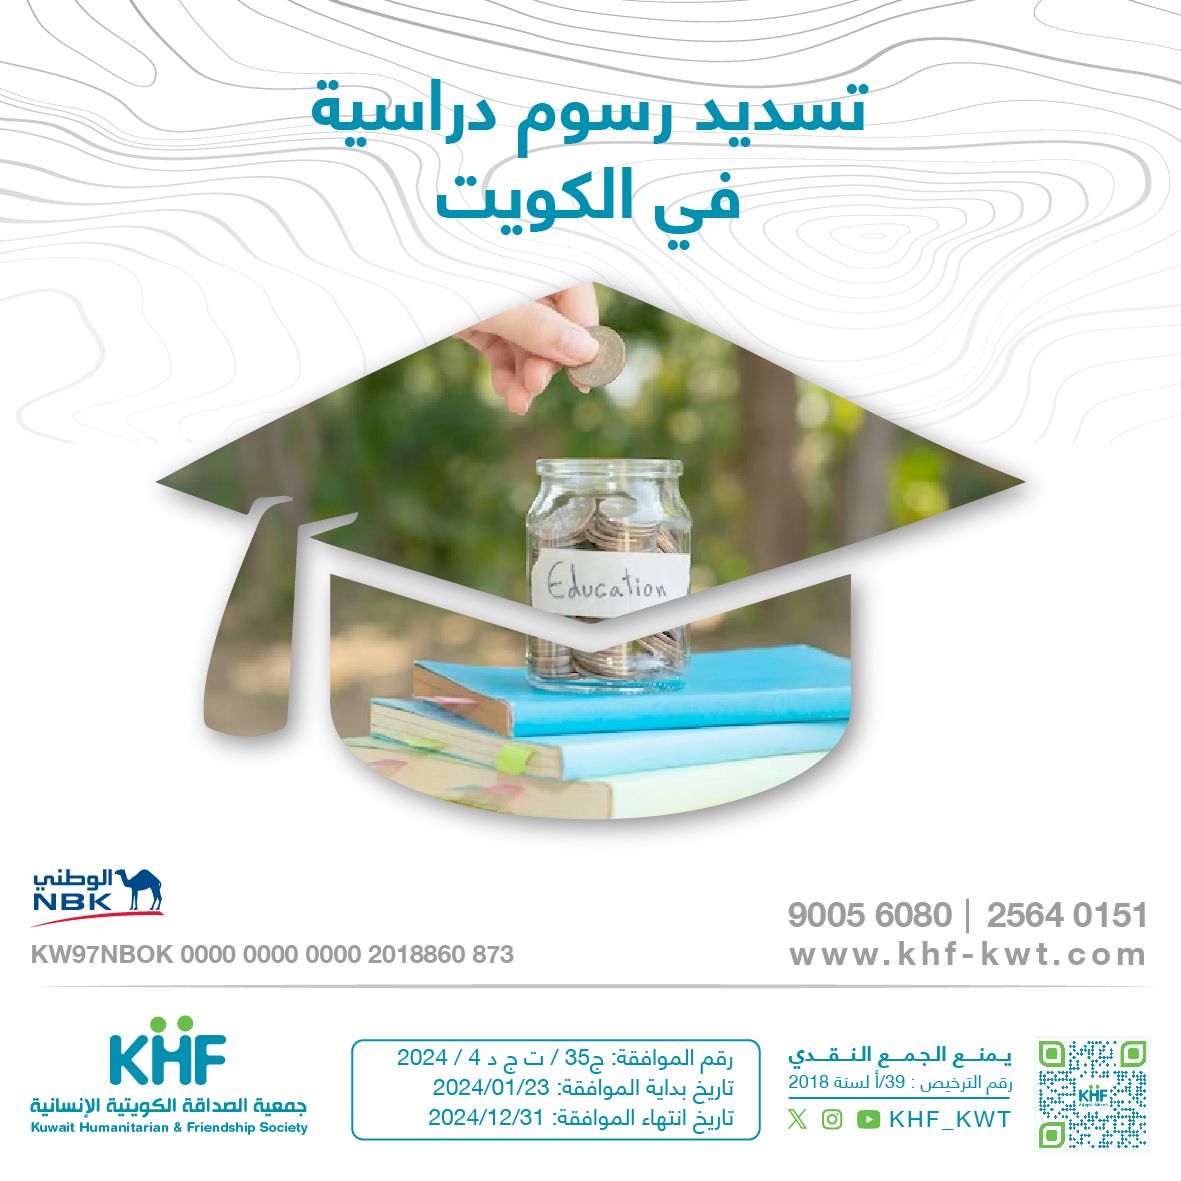 Tuition fees for students in Kuwait